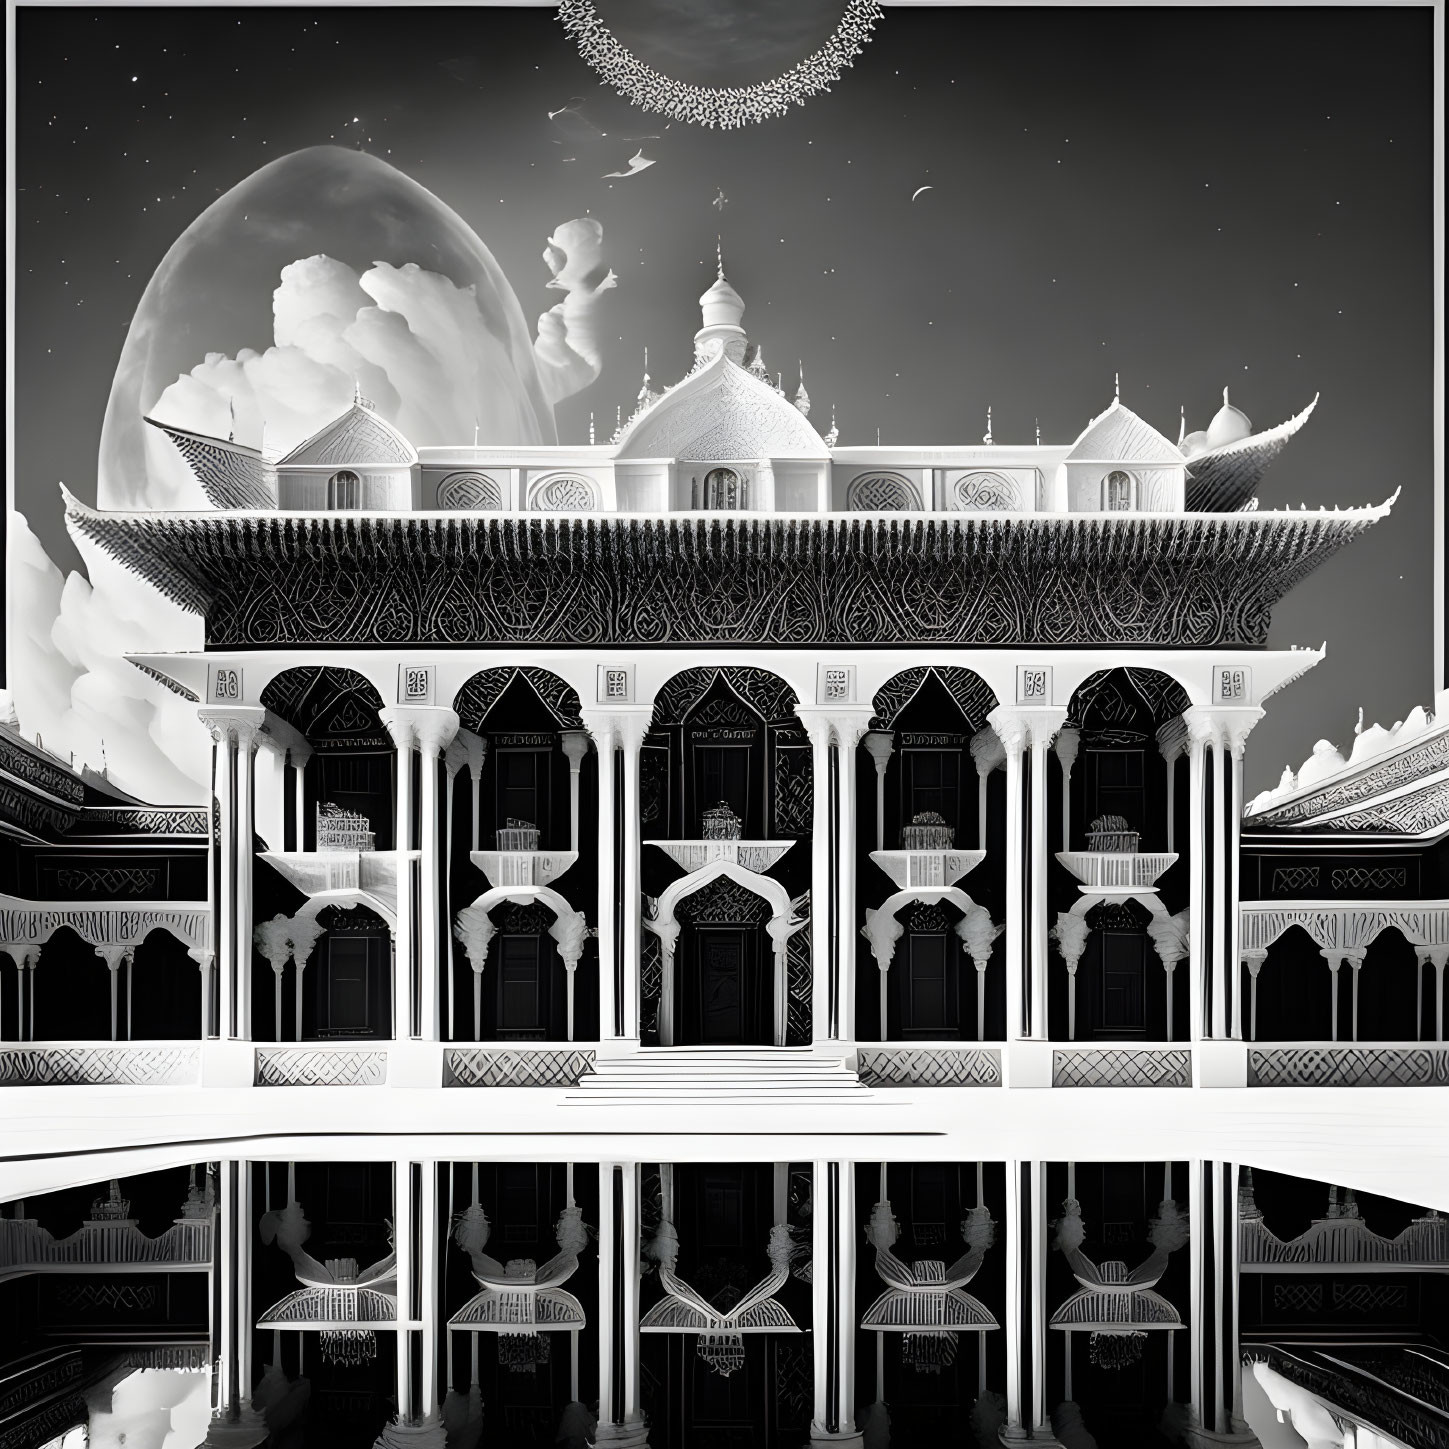 Detailed black and white illustration of ornate palace with arches and moon.